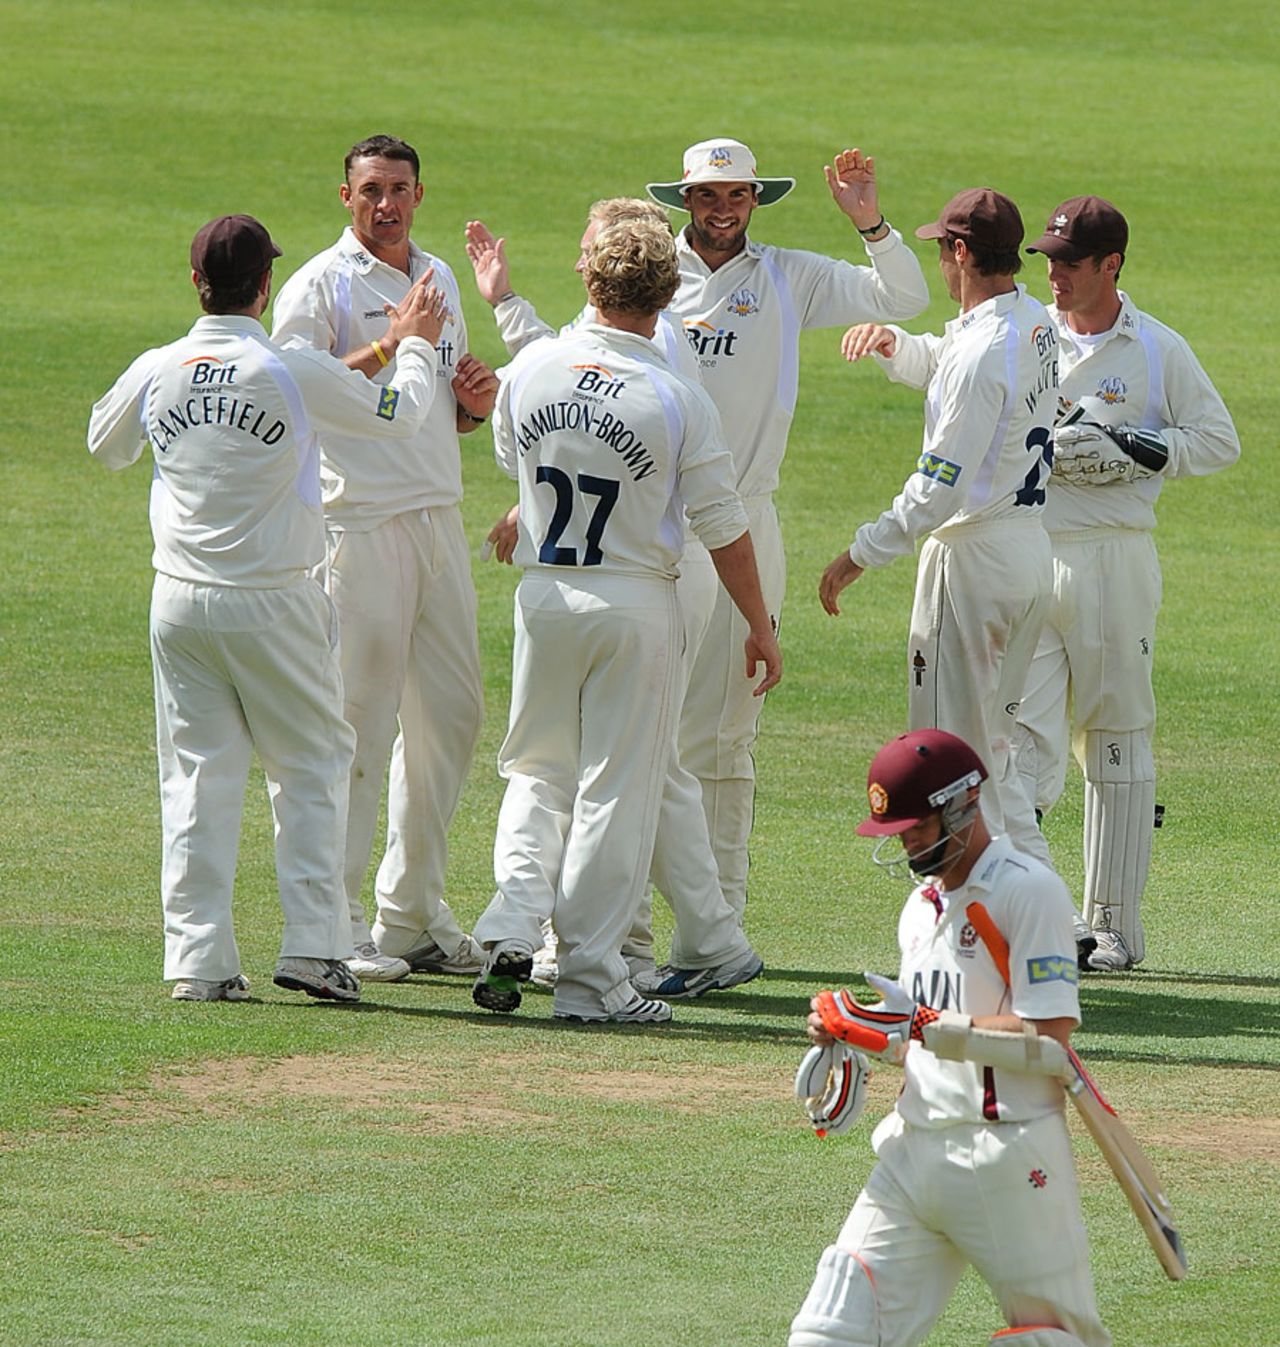 Andre Nel is congratulated by his Surrey team-mates after removing Stephen Peters, Surrey v Northamptonshire, County Championship Division Two, The Oval, July 21, 2010